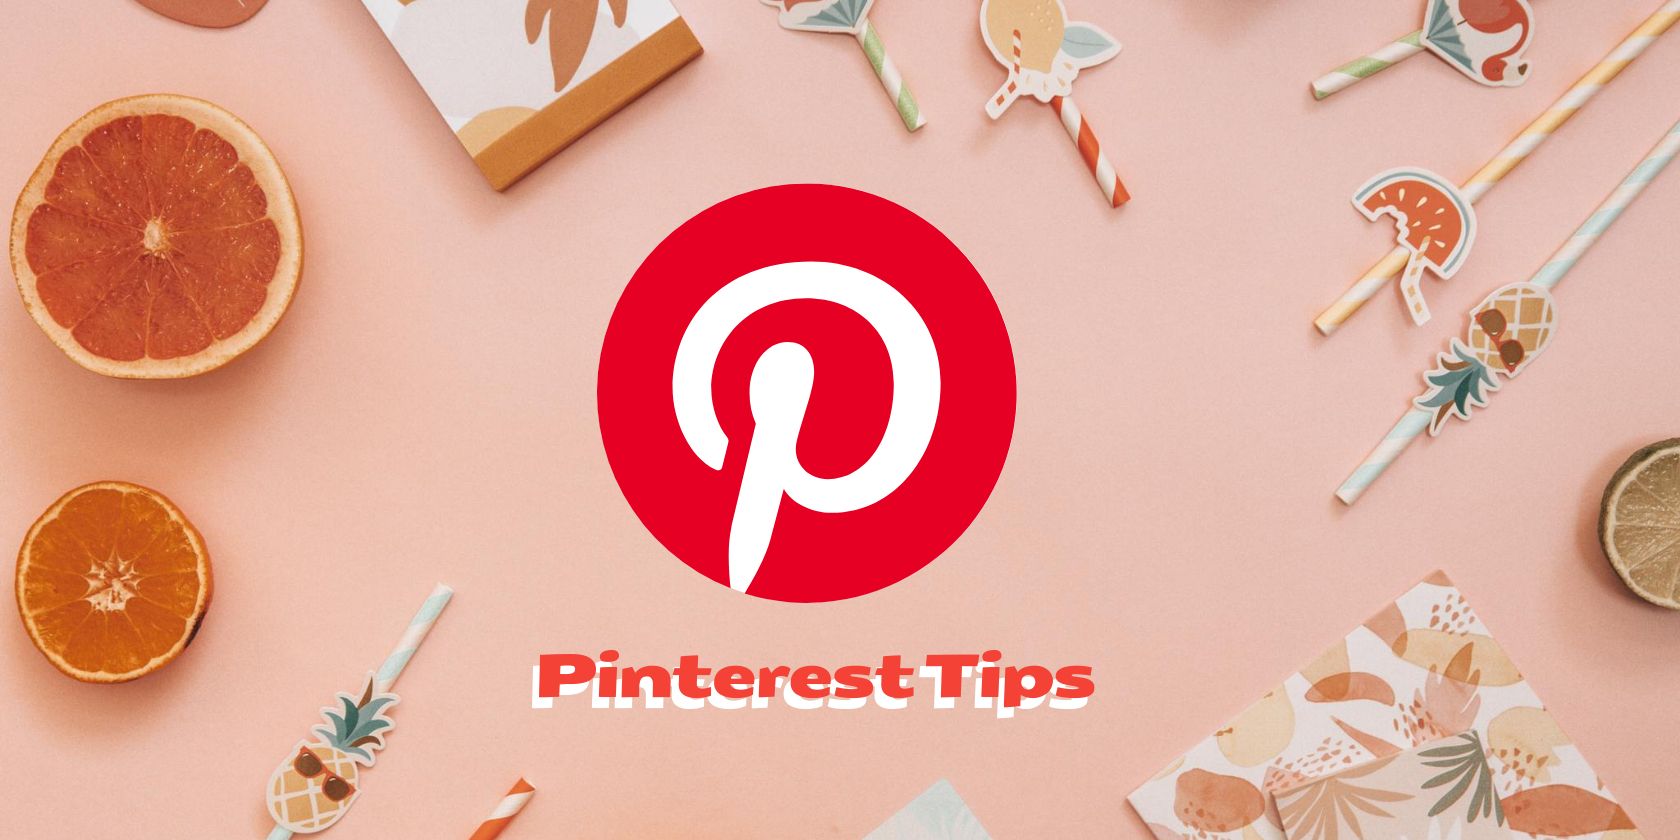 An image showing Pinterest logo along with other elements